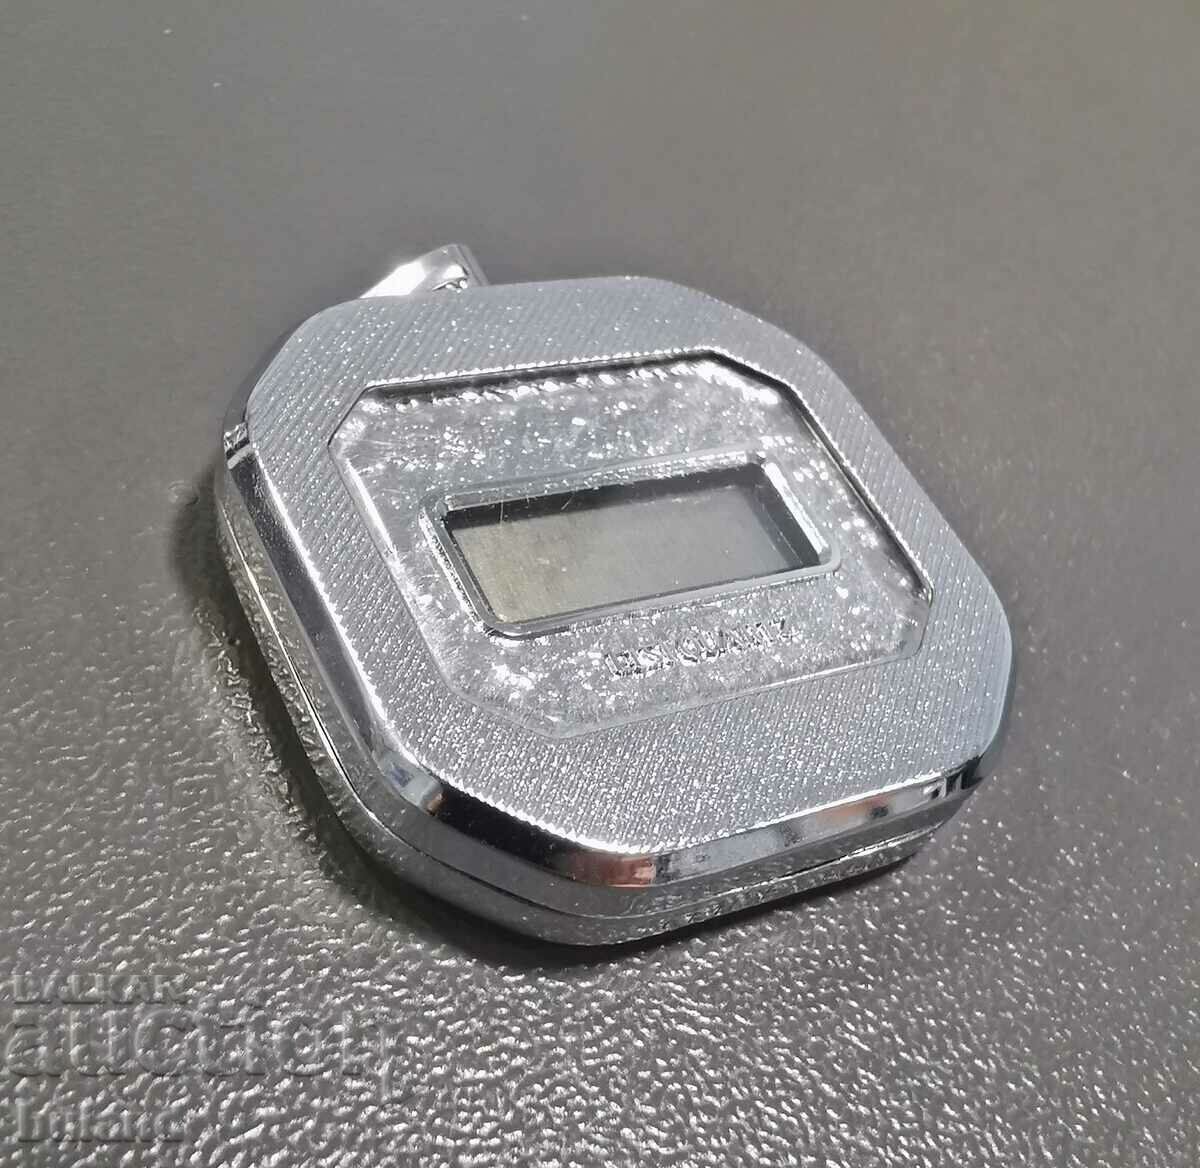 Electronic Quartz Watch for Repair or Parts